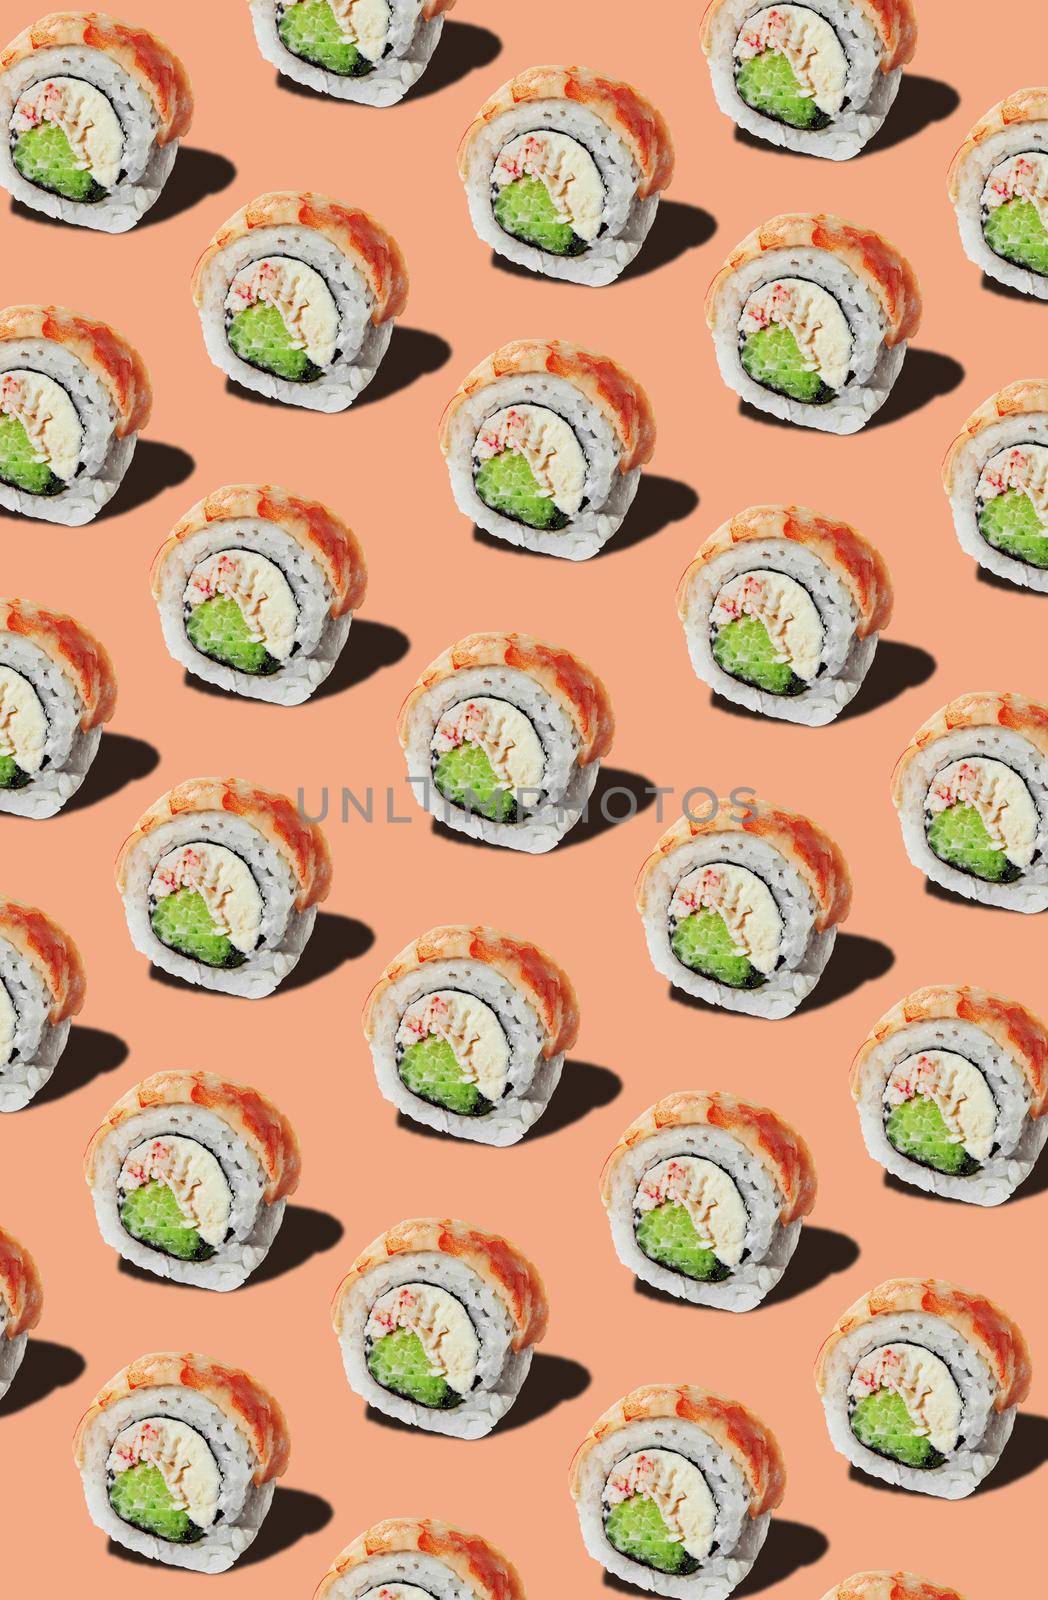 Rolls with tiger prawn fillet stuffed with cream cheese, crab surimi and fresh cucumbers on pinkish orange background. Traditional Japanese food concept. Seamless food pattern